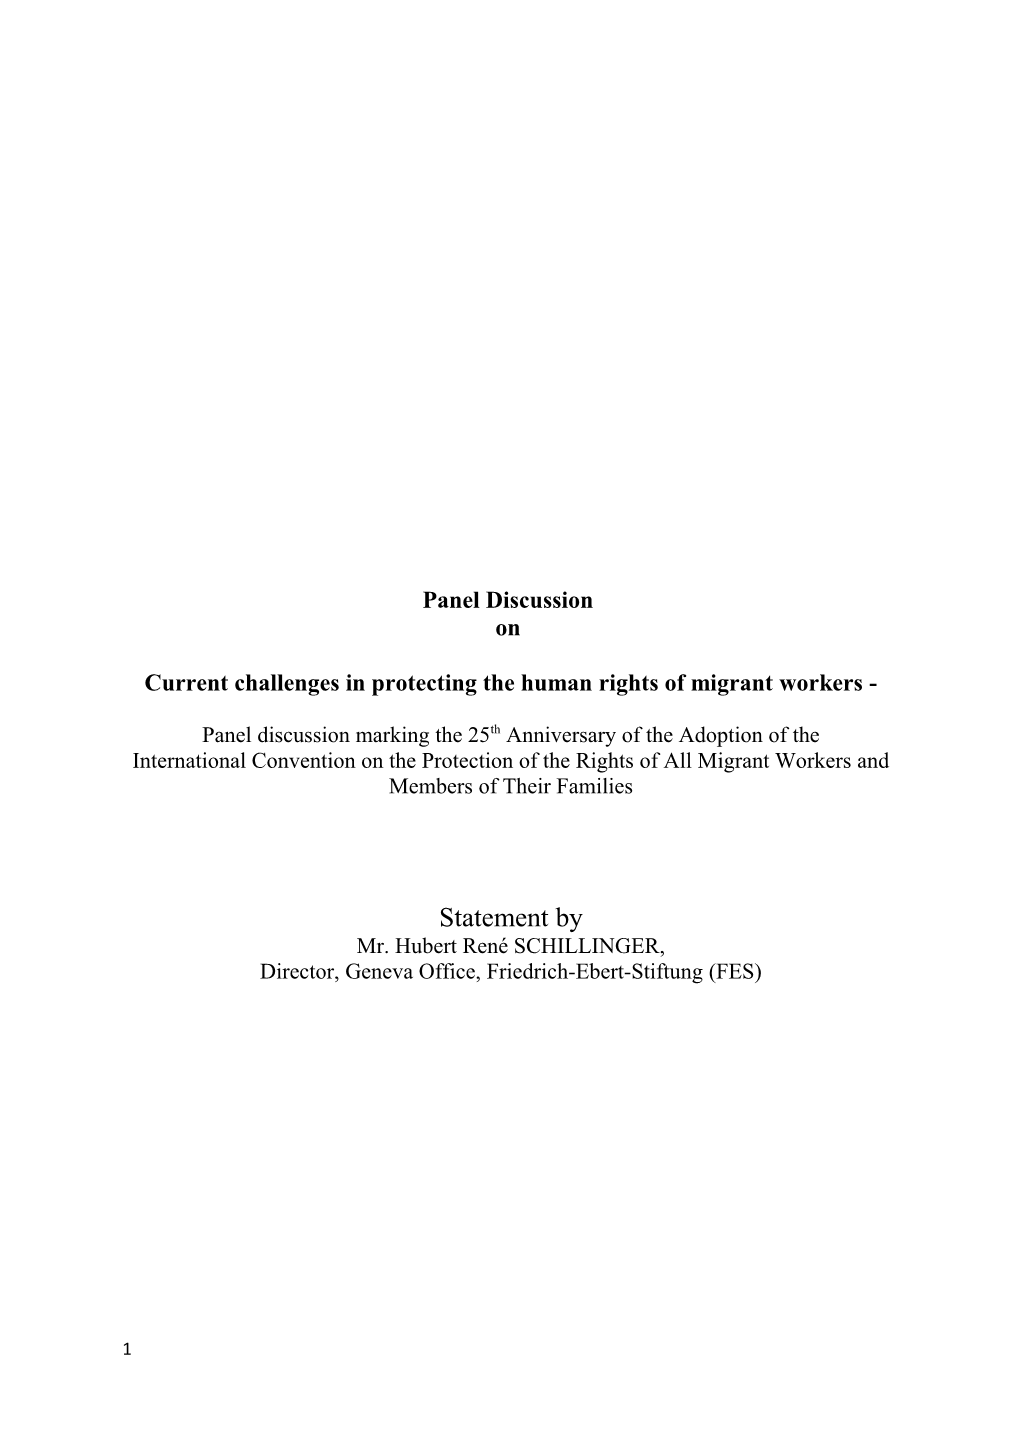 Current Challenges in Protecting the Human Rights of Migrant Workers